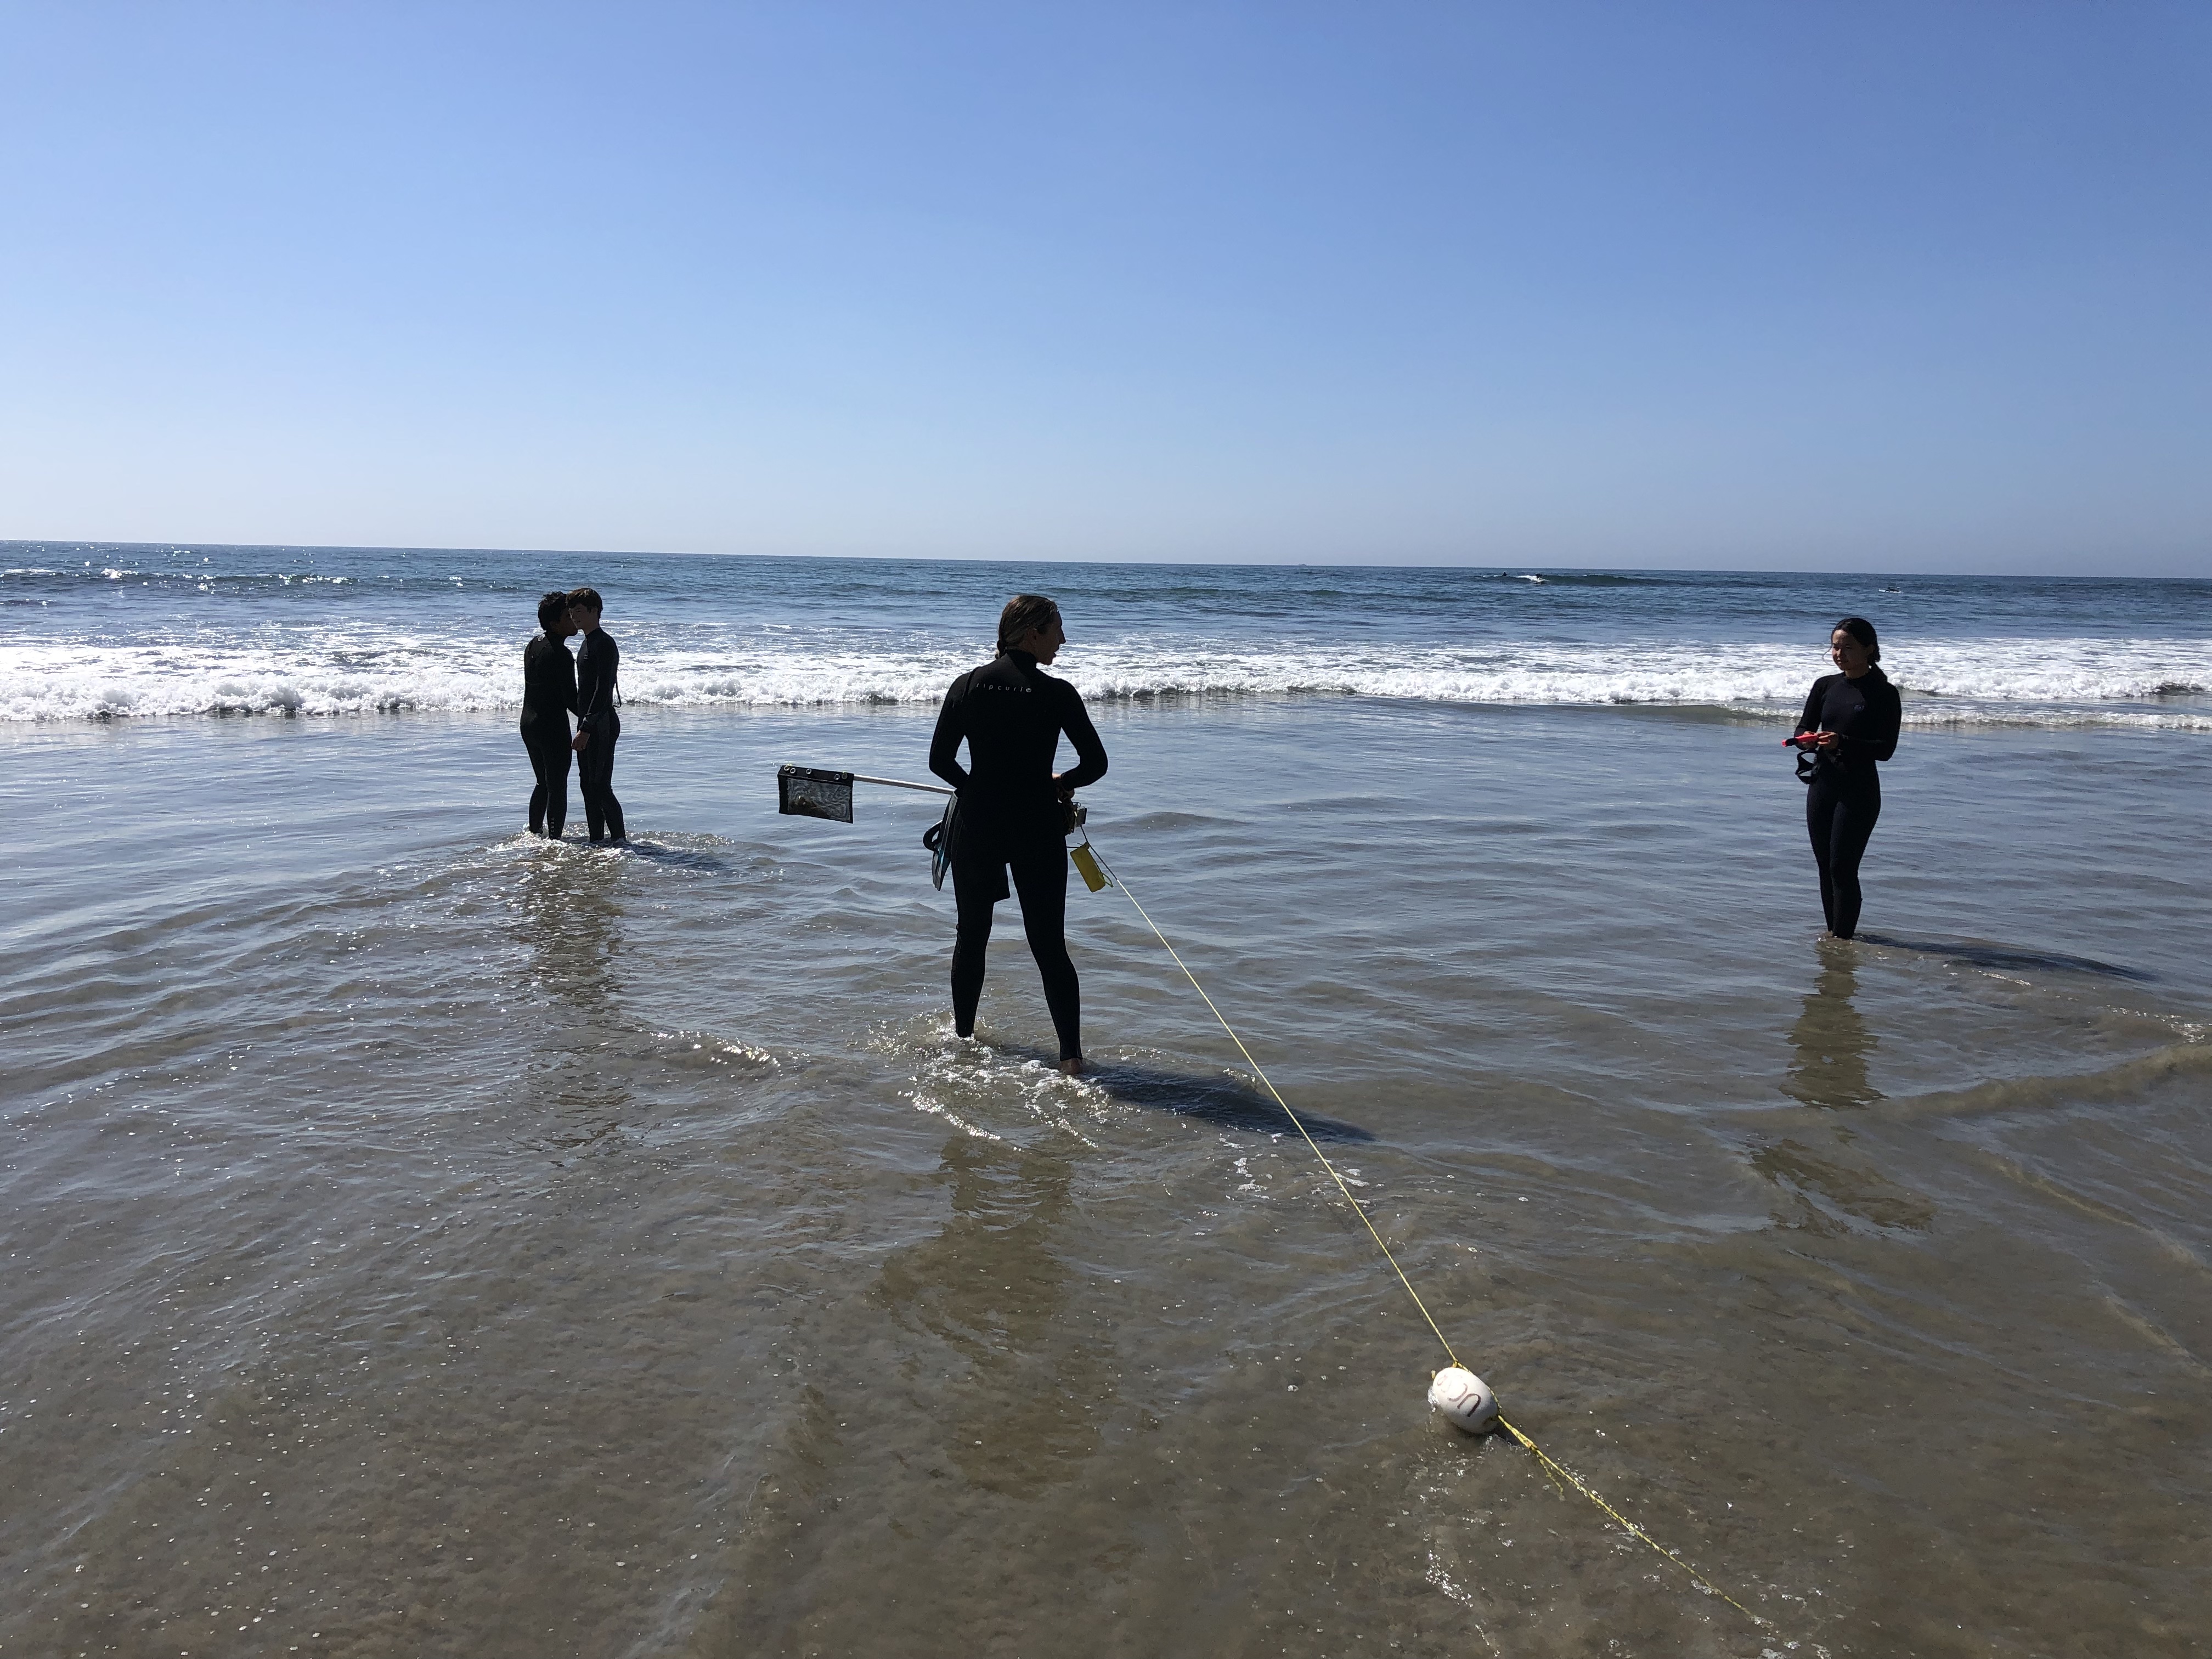 The team collects data in the surf zone.